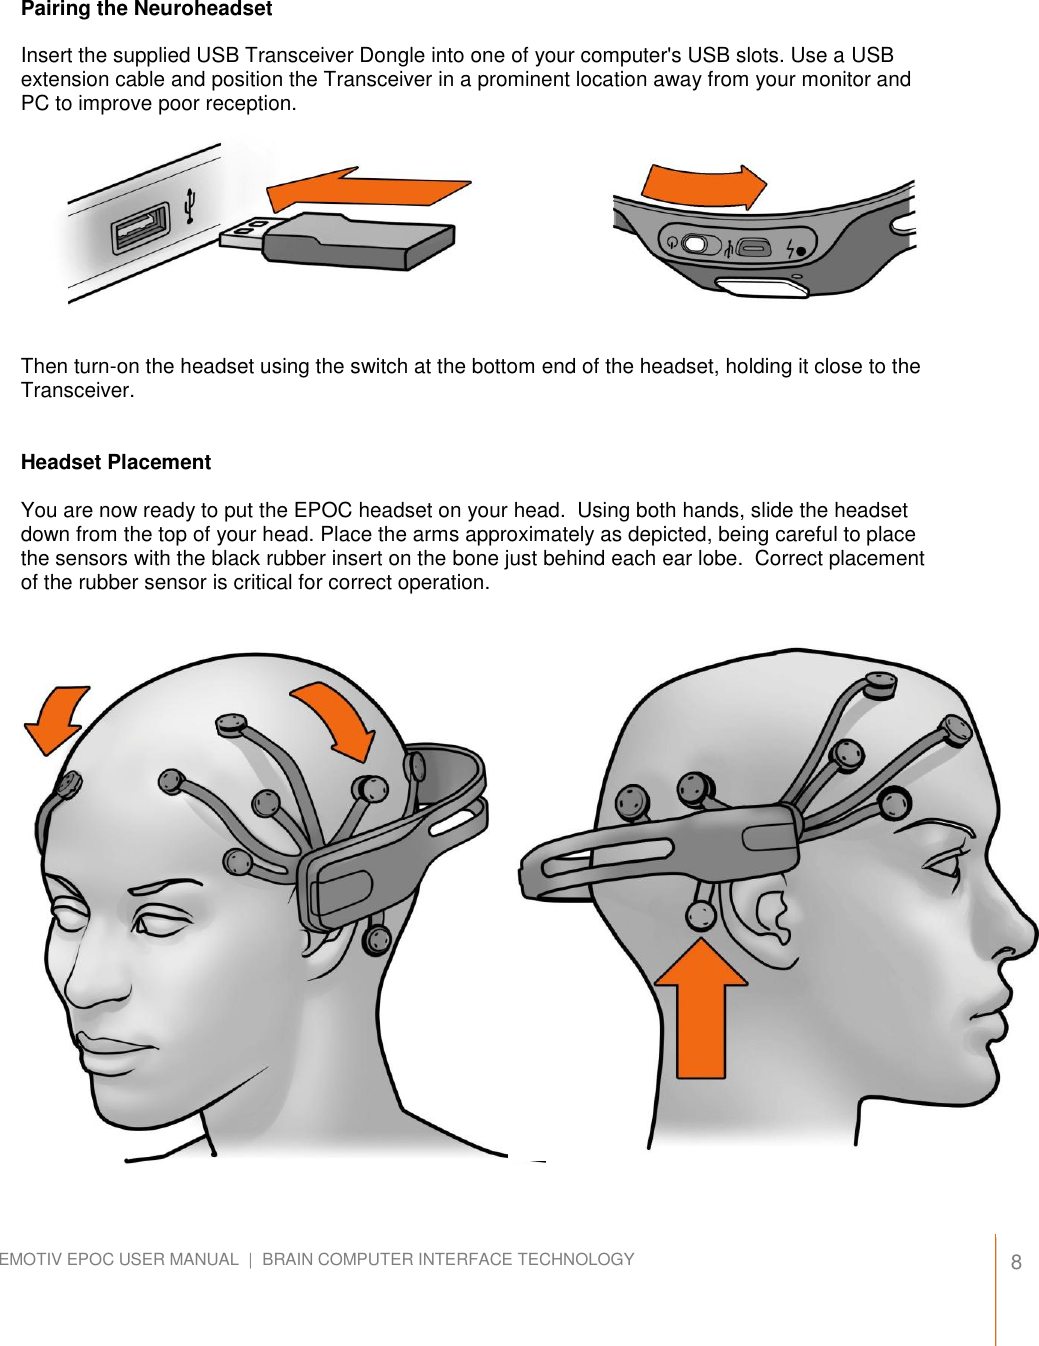   8 EMOTIV EPOC USER MANUAL  |  BRAIN COMPUTER INTERFACE TECHNOLOGY    Pairing the Neuroheadset  Insert the supplied USB Transceiver Dongle into one of your computer&apos;s USB slots. Use a USB extension cable and position the Transceiver in a prominent location away from your monitor and PC to improve poor reception.           Then turn-on the headset using the switch at the bottom end of the headset, holding it close to the Transceiver.   Headset Placement  You are now ready to put the EPOC headset on your head.  Using both hands, slide the headset down from the top of your head. Place the arms approximately as depicted, being careful to place the sensors with the black rubber insert on the bone just behind each ear lobe.  Correct placement of the rubber sensor is critical for correct operation.                        